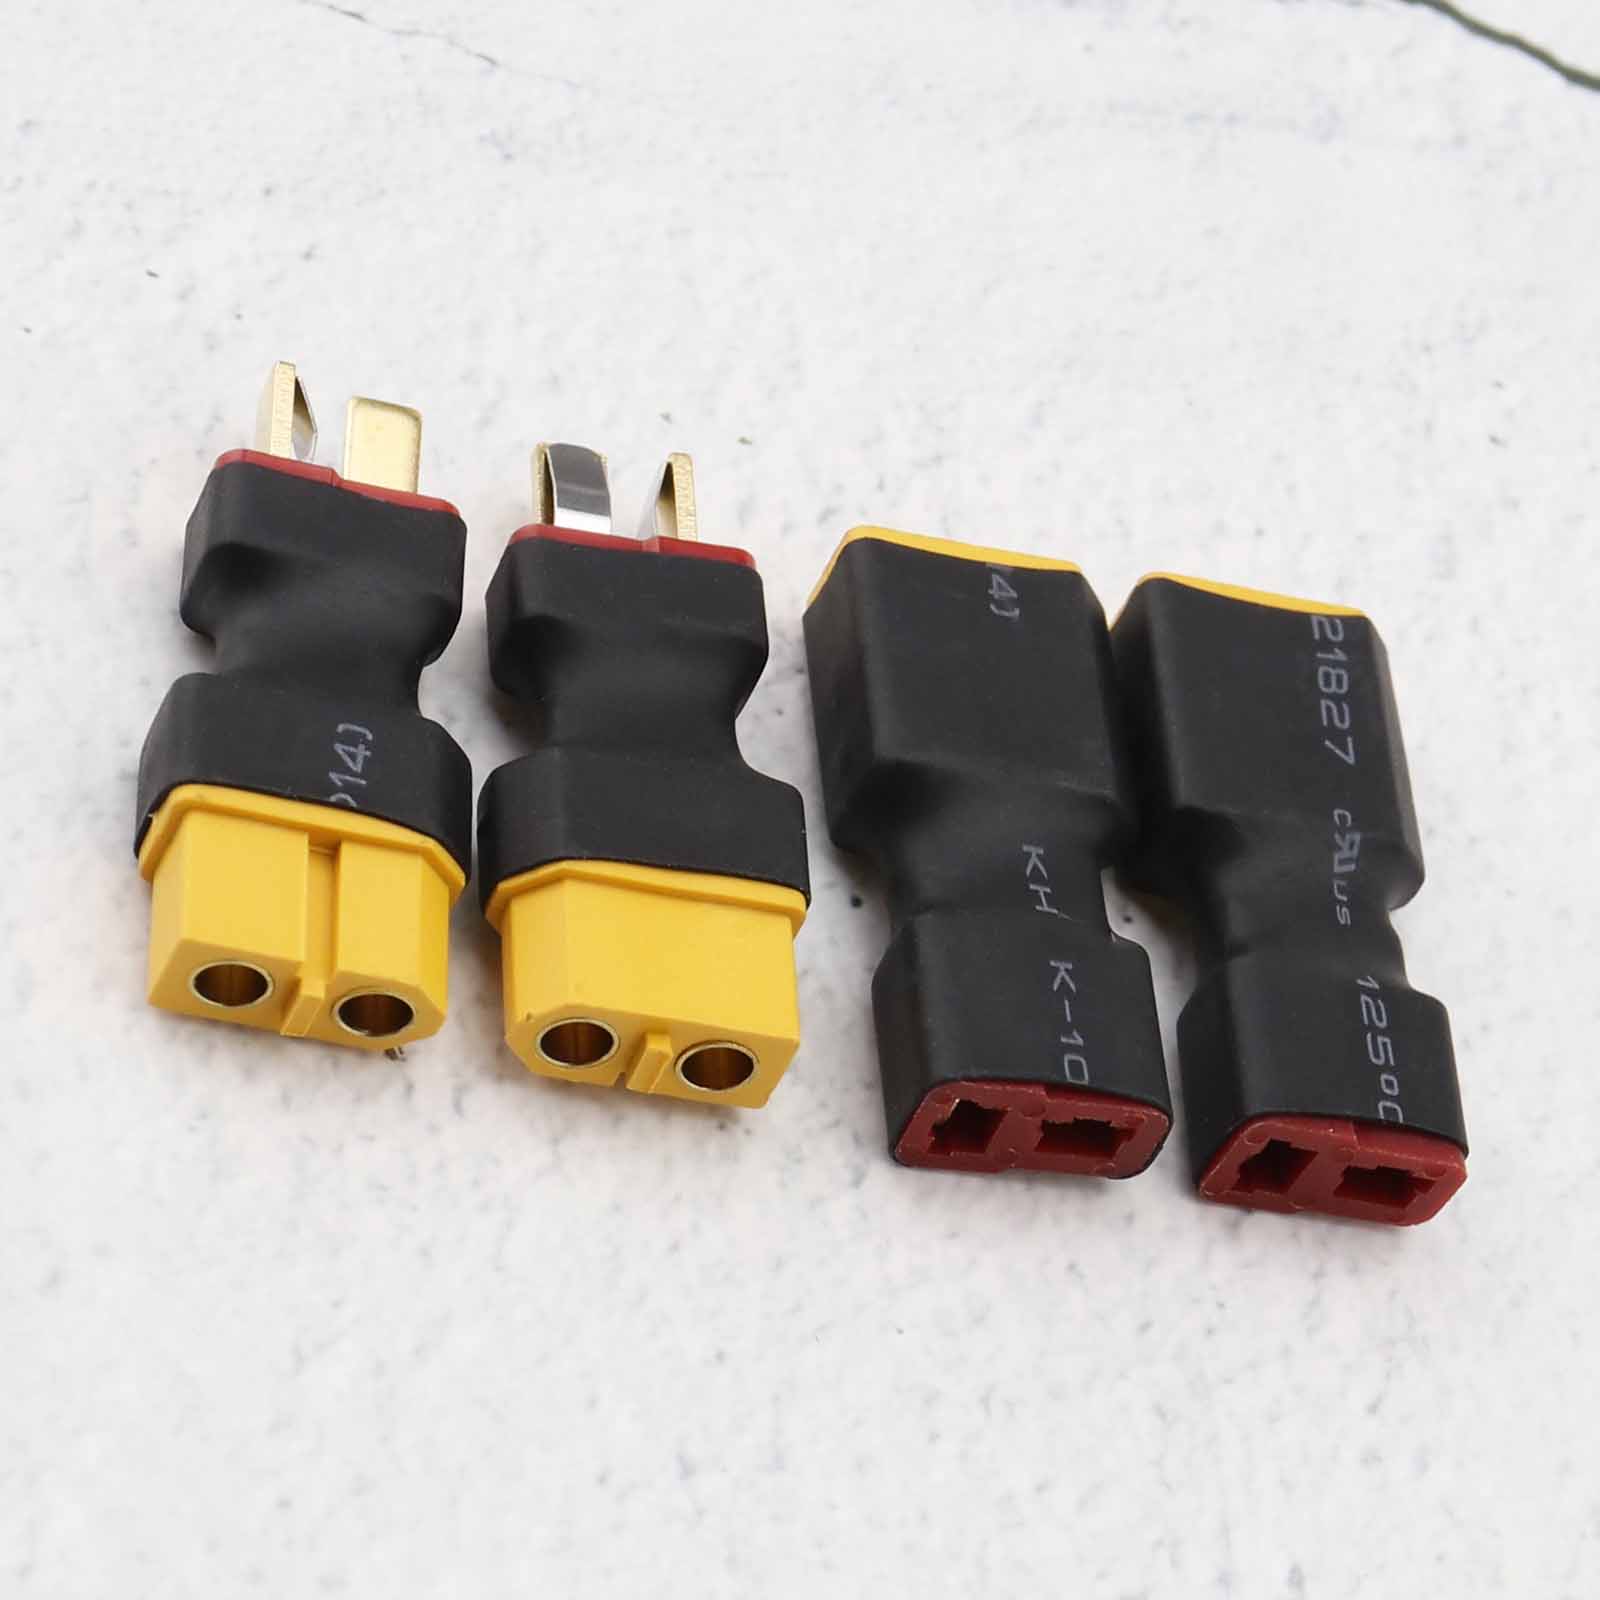 8pcs//kit XT60////XT90 to Male Female T Plug Connector Adapter for UAV RC Car